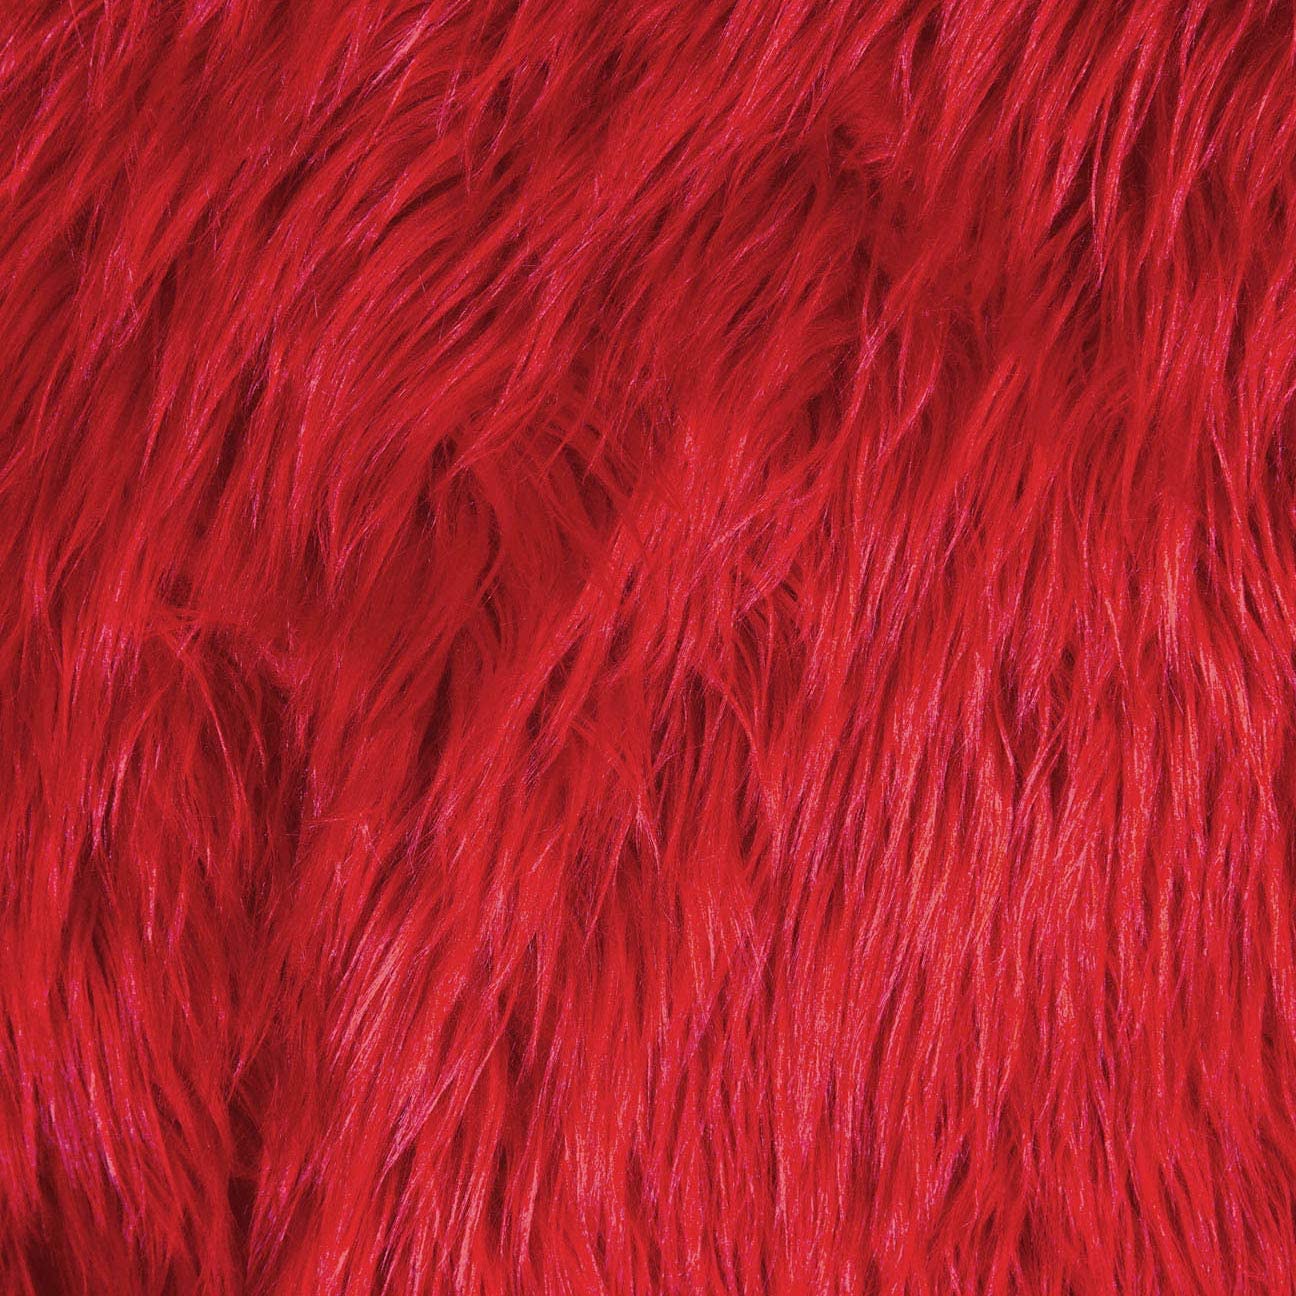 FabricLA Fabricla Shaggy Faux Fur Fabric By The Yard - 72 X 60 Inches (180  Cm X 150 Cm) - Craft Furry Fabric For Sewing Apparel, Rugs, Pi